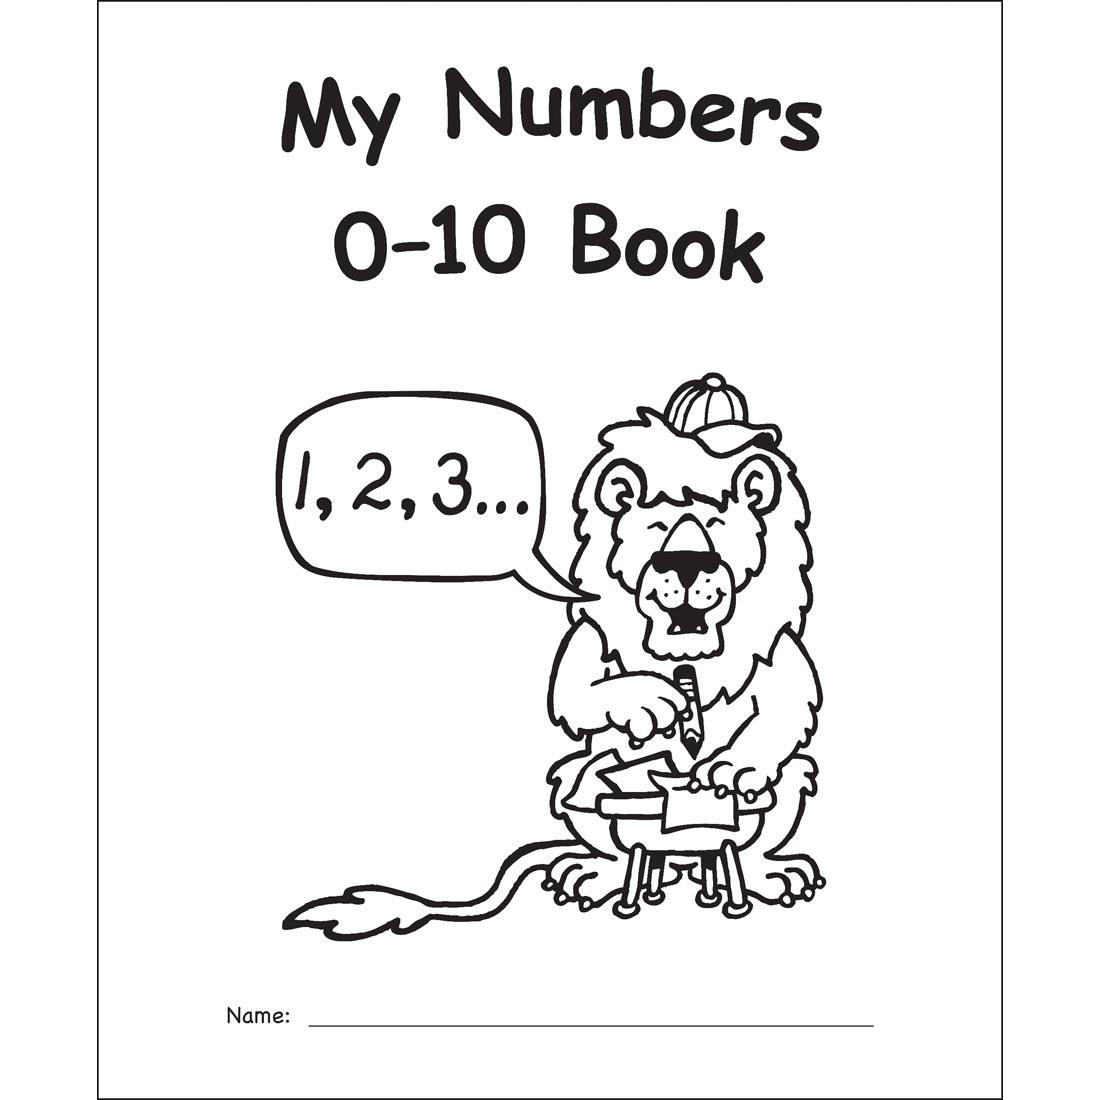 My Numbers 0-10 Book